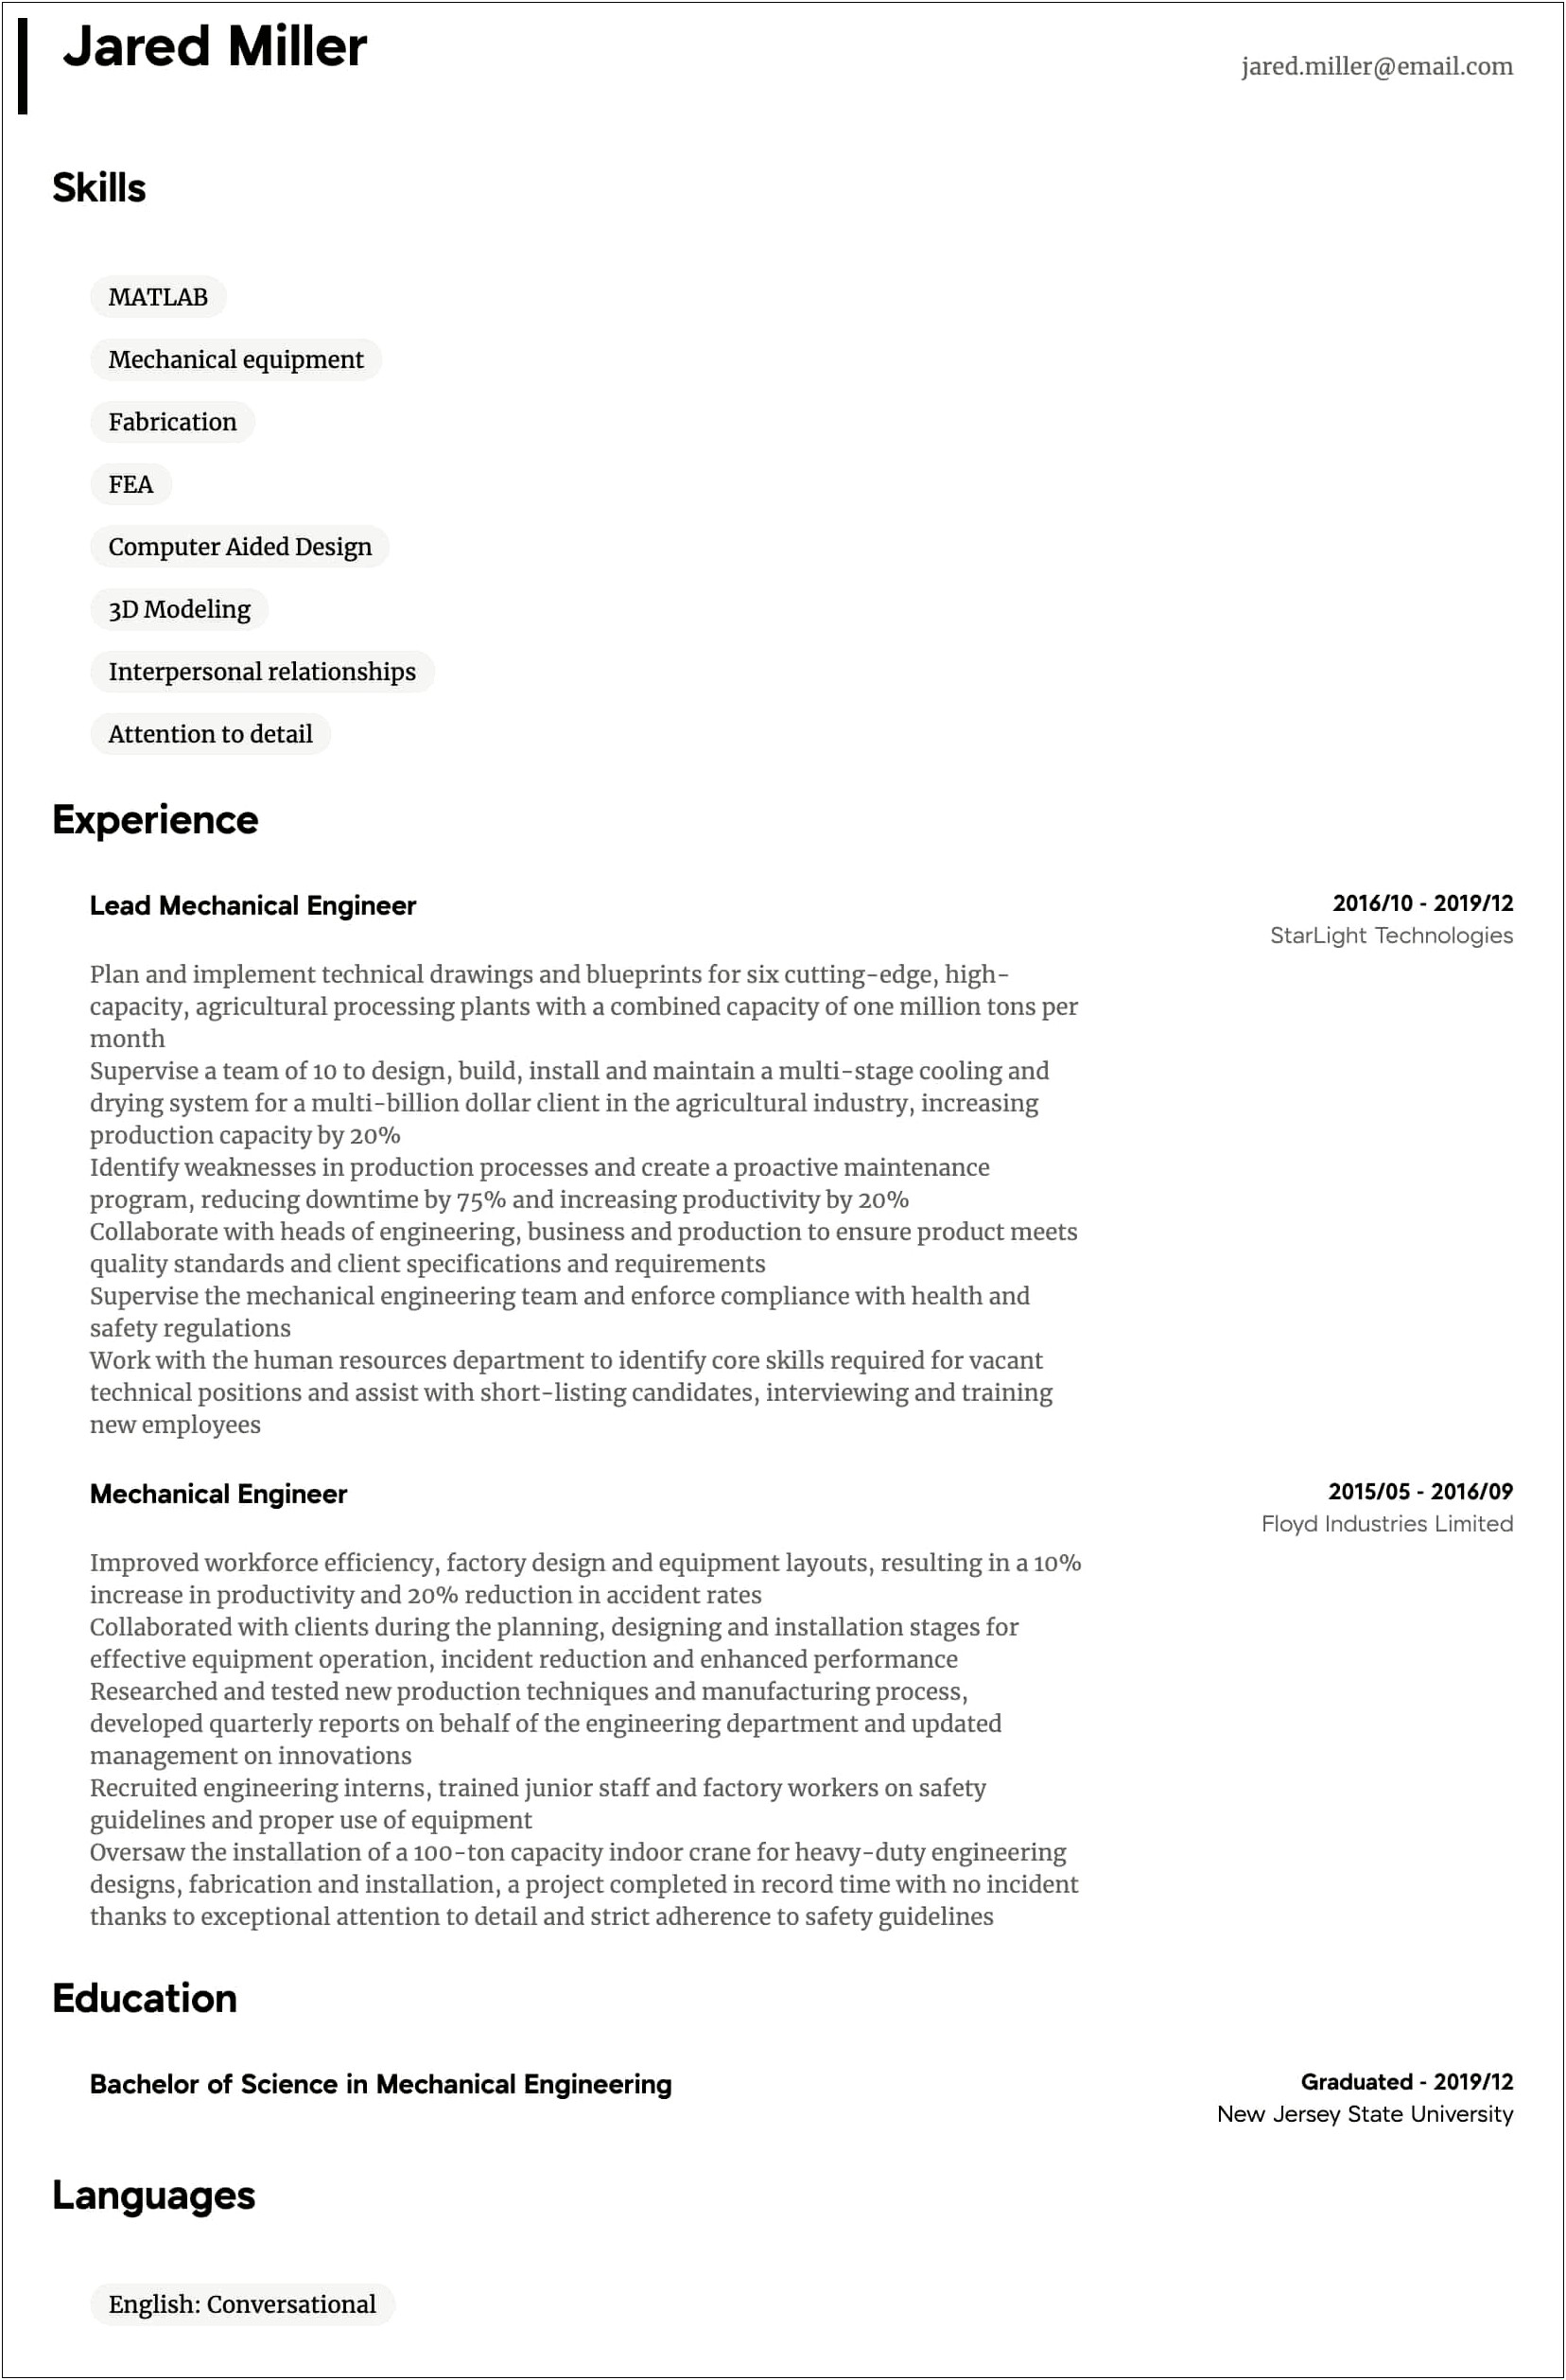 Sample Resume For Mechanical Engineer With Experience